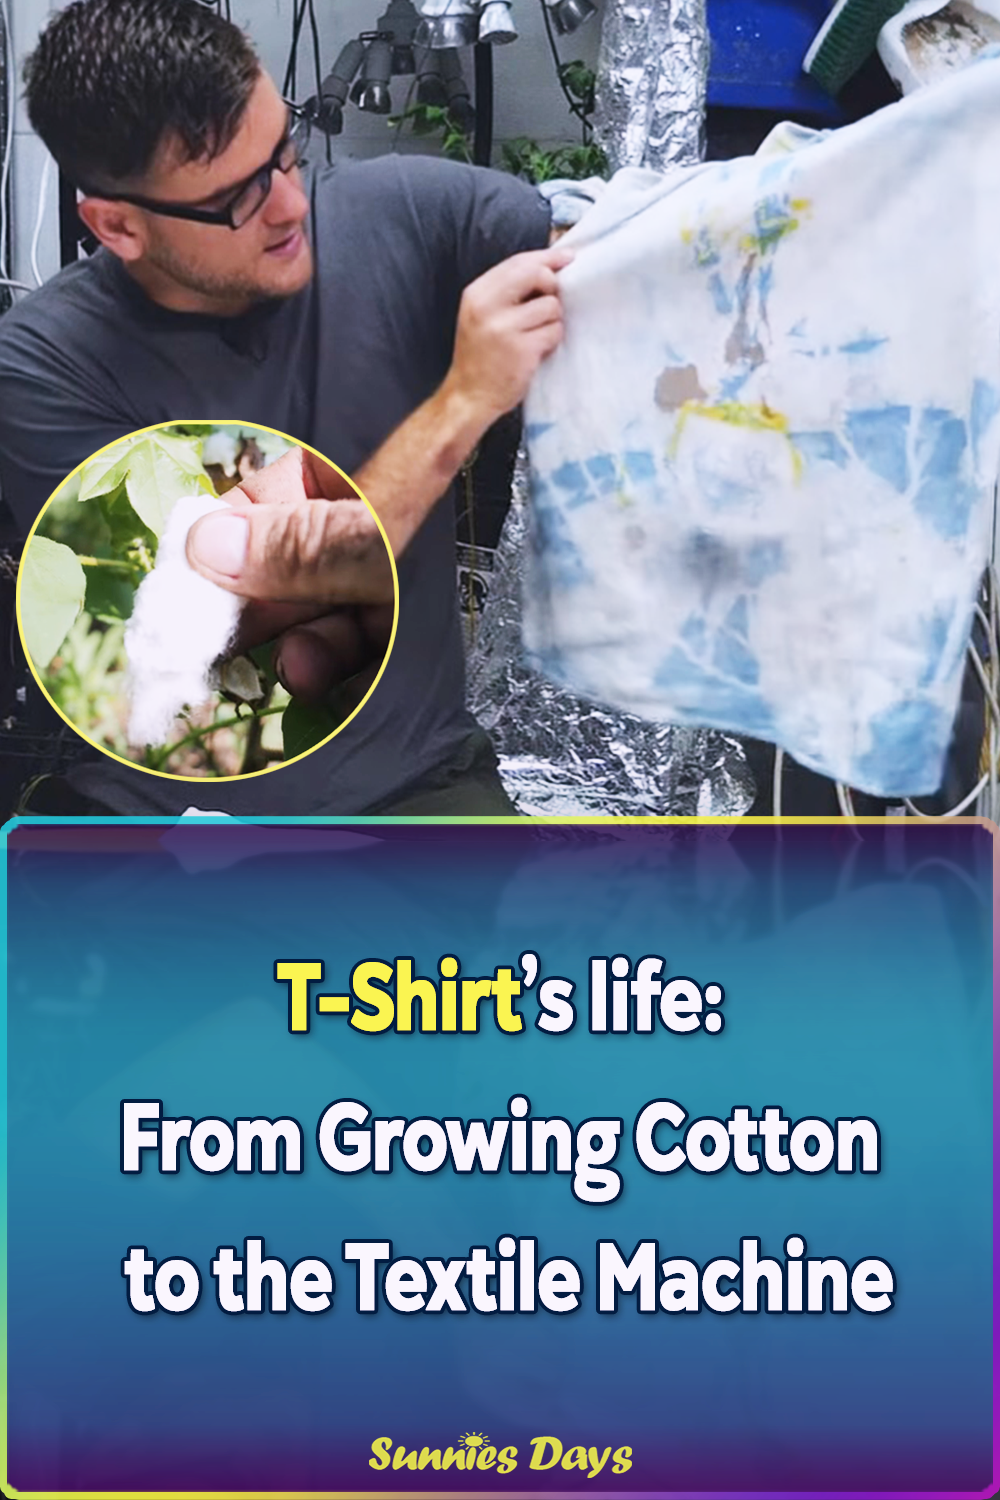 easy T-shirt projects, T-shirt projects step by step, how to start a textile project from the beginning, ideas for projects with small budgets, creative way to make a t-shirt, how to make a textile project using your own cotton farm